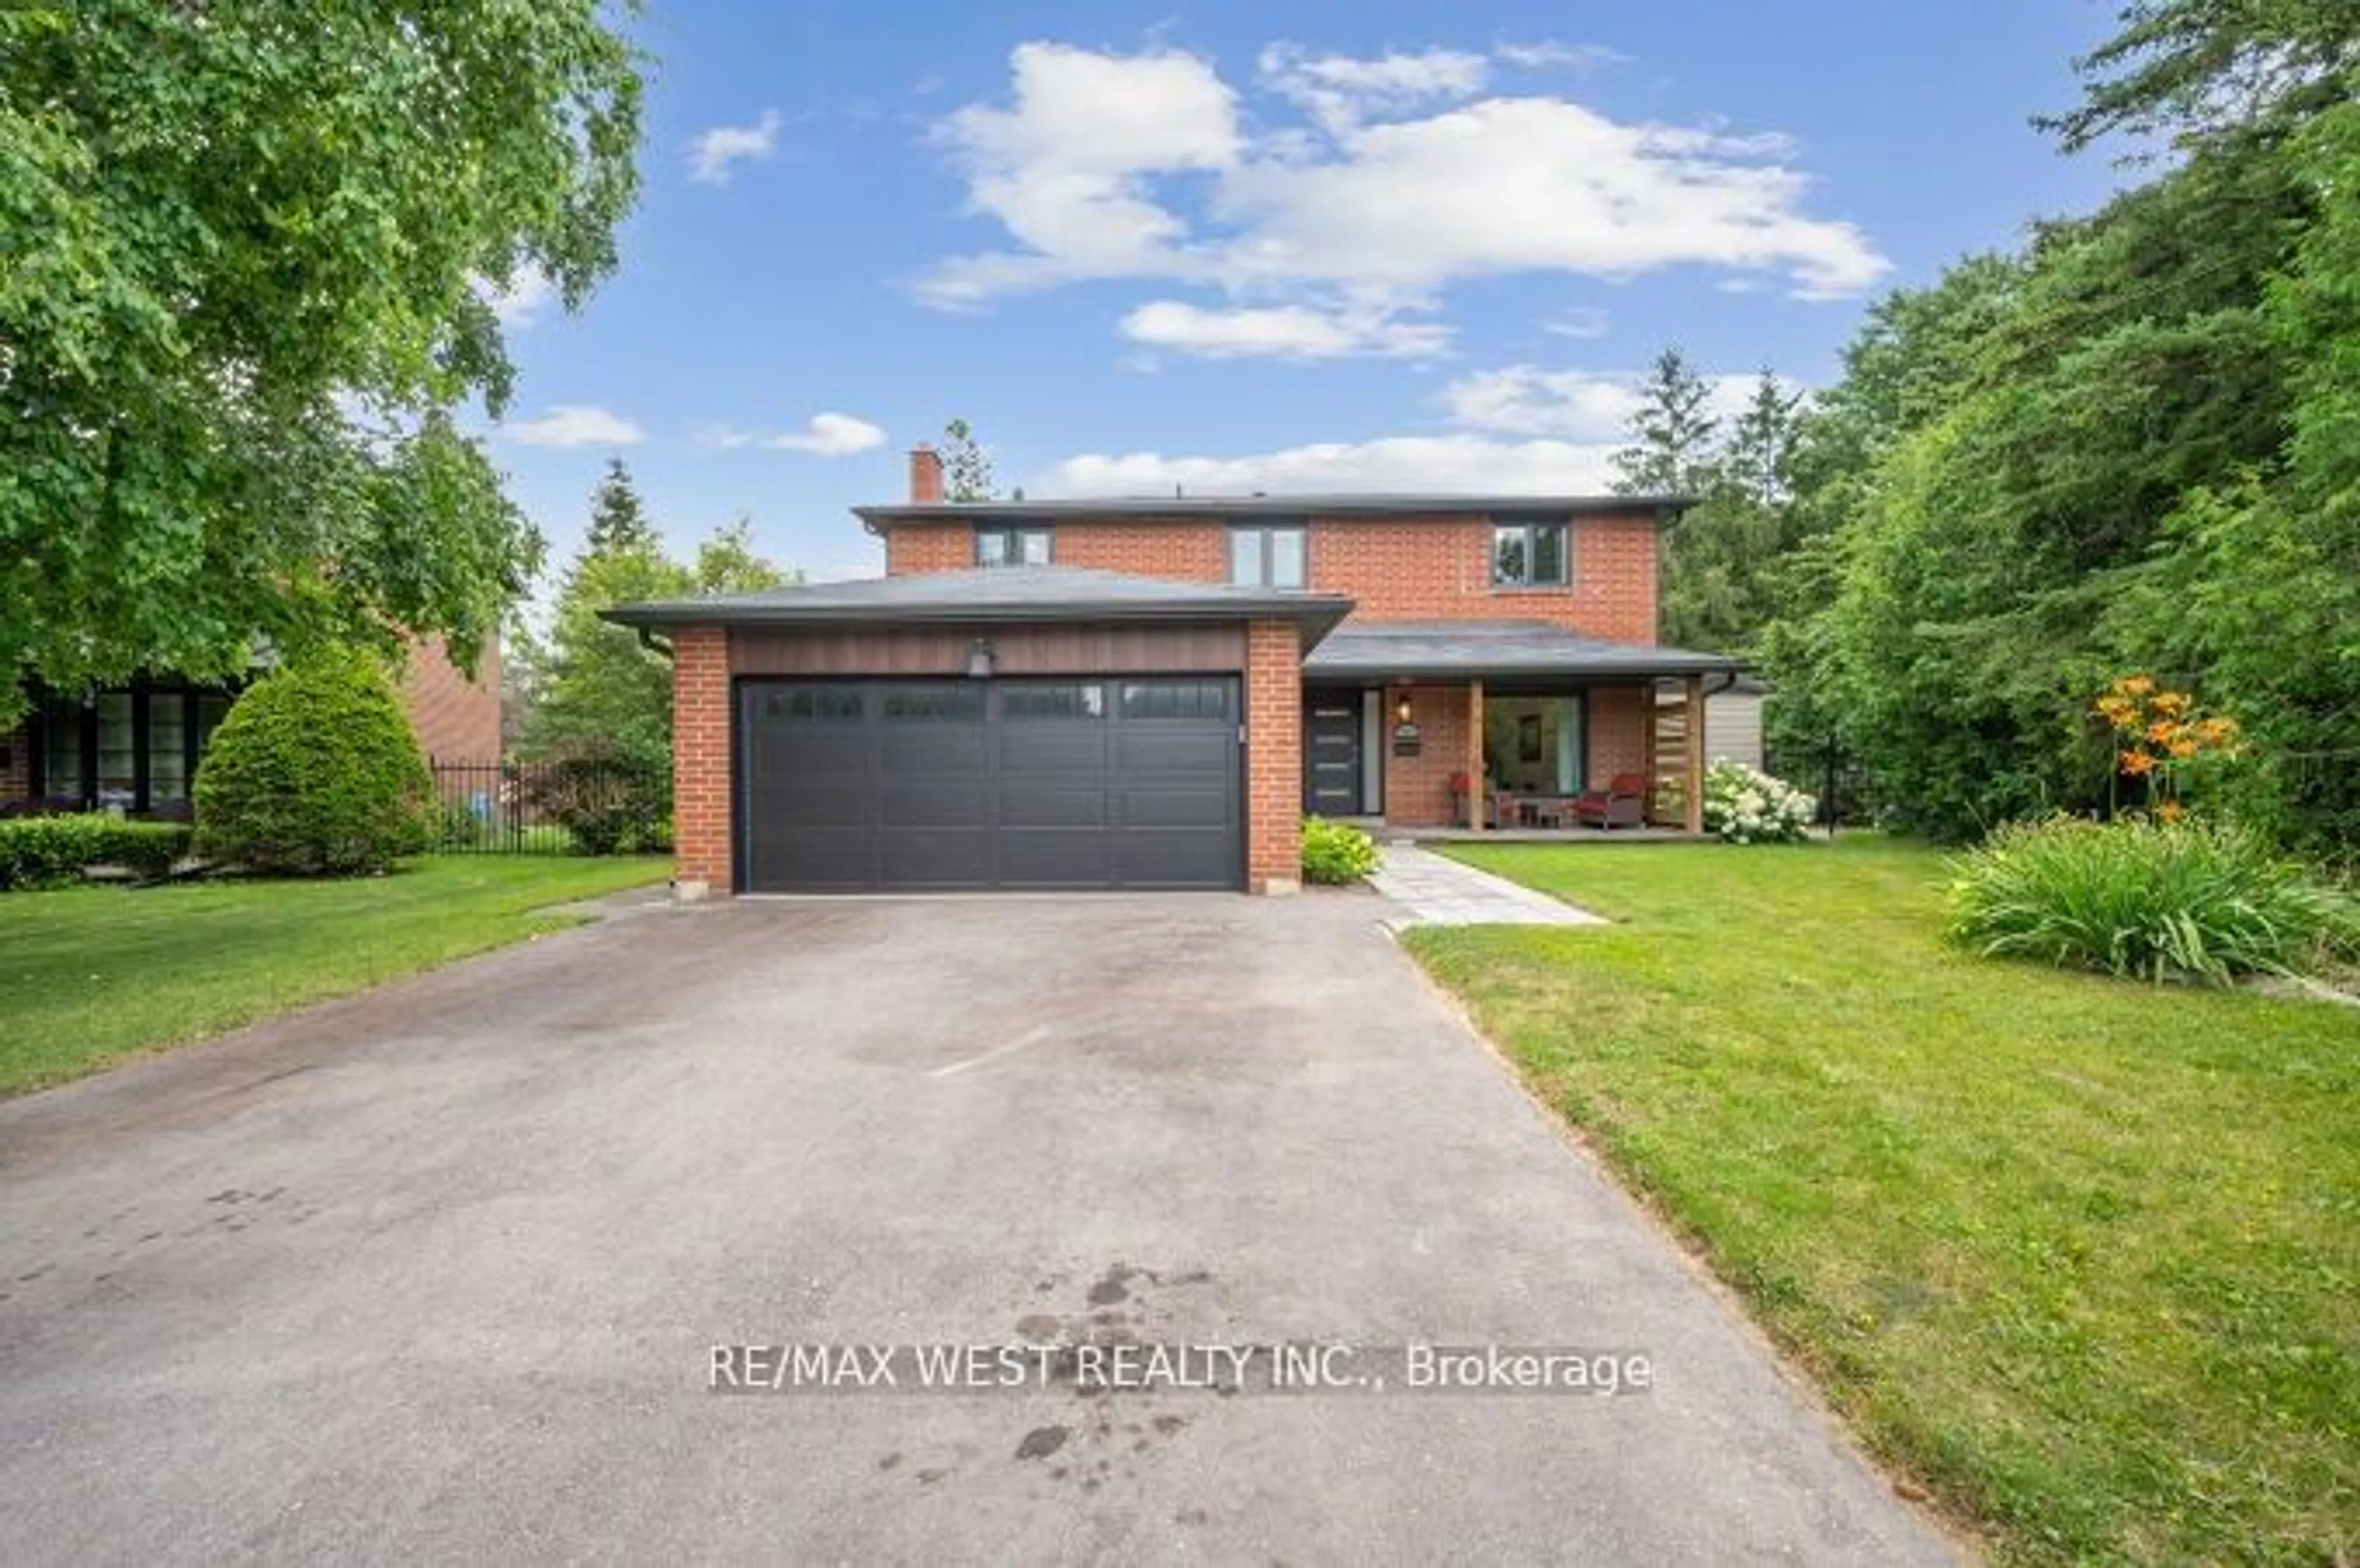 Frontside or backside of a home for 4021 Mahogany Row, Mississauga Ontario L4W 2H7